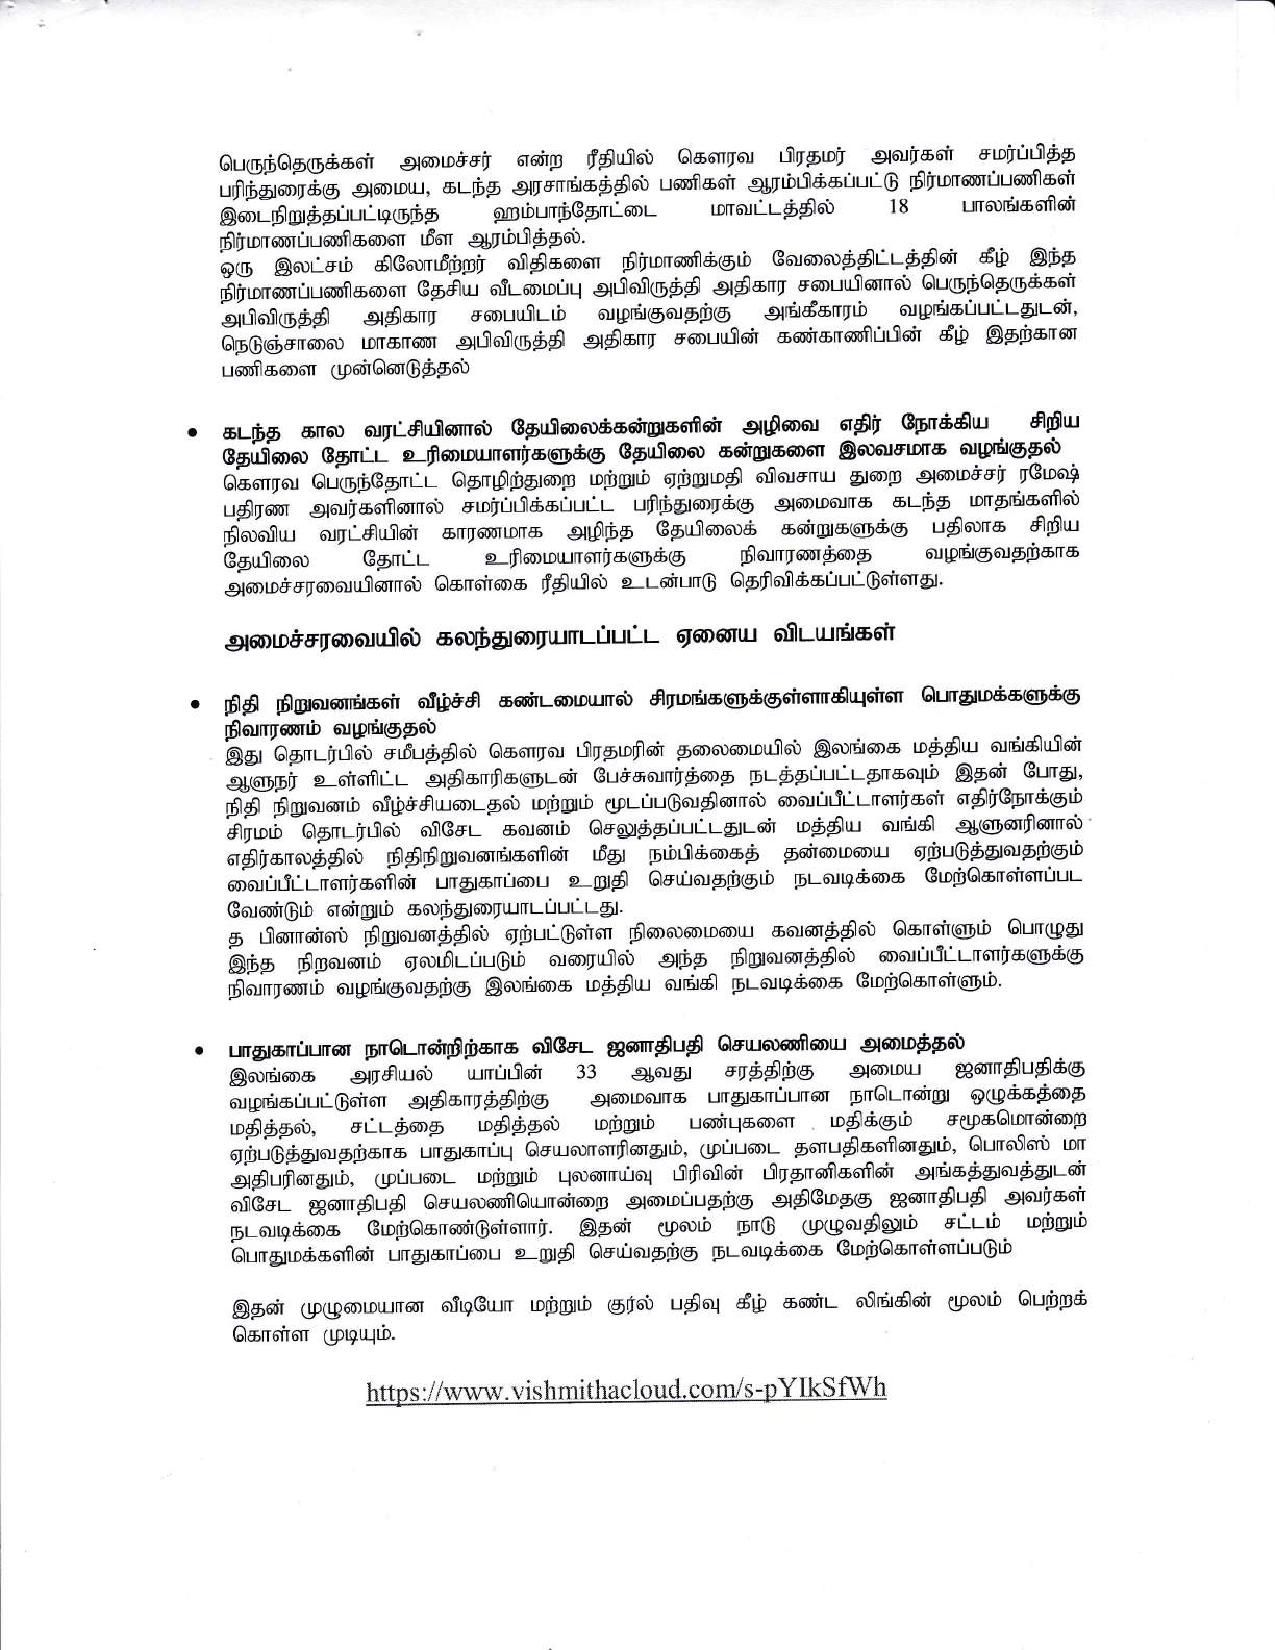 Cabinet Tamil compressed page 003